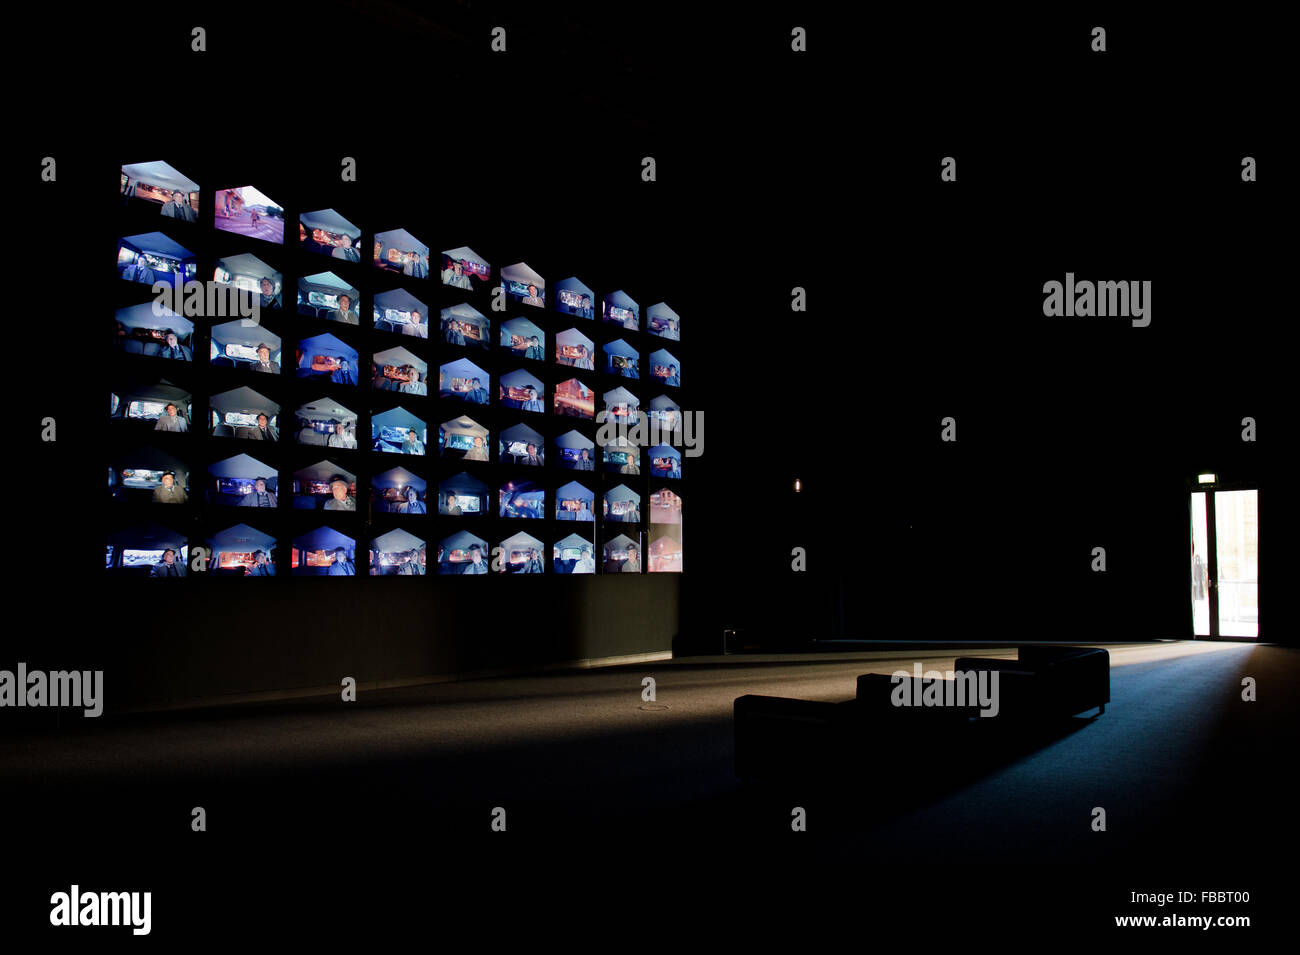 The multimedia installation 'Die Provinz des Menschen/The Human Province' by the composer and director Heiner Goebbels can be seen in the Kunsthalle im Lipsiusbau in Dresden, Germany, 14 January 2016. The installation is made up of 54 different film sequences, played on a giant wall of monitors, together forming a composition that explores polyphony both as a musical and visual phenomenon and that presents an urban soundscape of various cities, criss-crossed by actor André Wilms. Visitors watch the same man observing the same rituals over the course of ten years, between 2004 and 2014, pacin Stock Photo